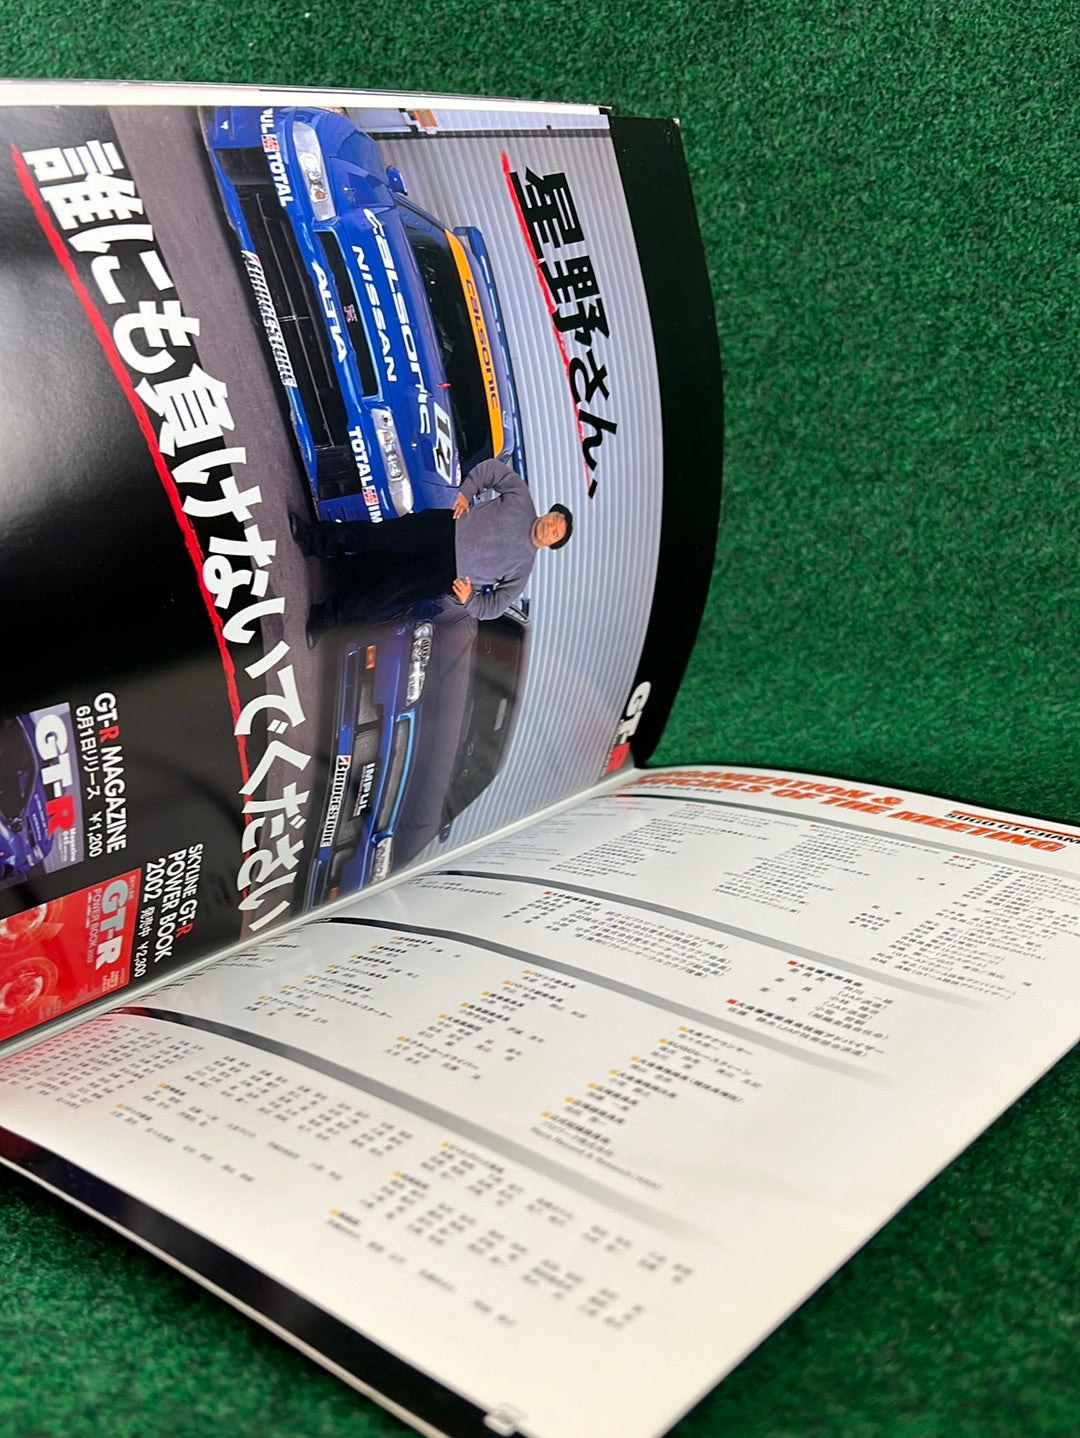 JGTC - 2002 All Japan GT Championship Round 3 at SUGO Race Event Program